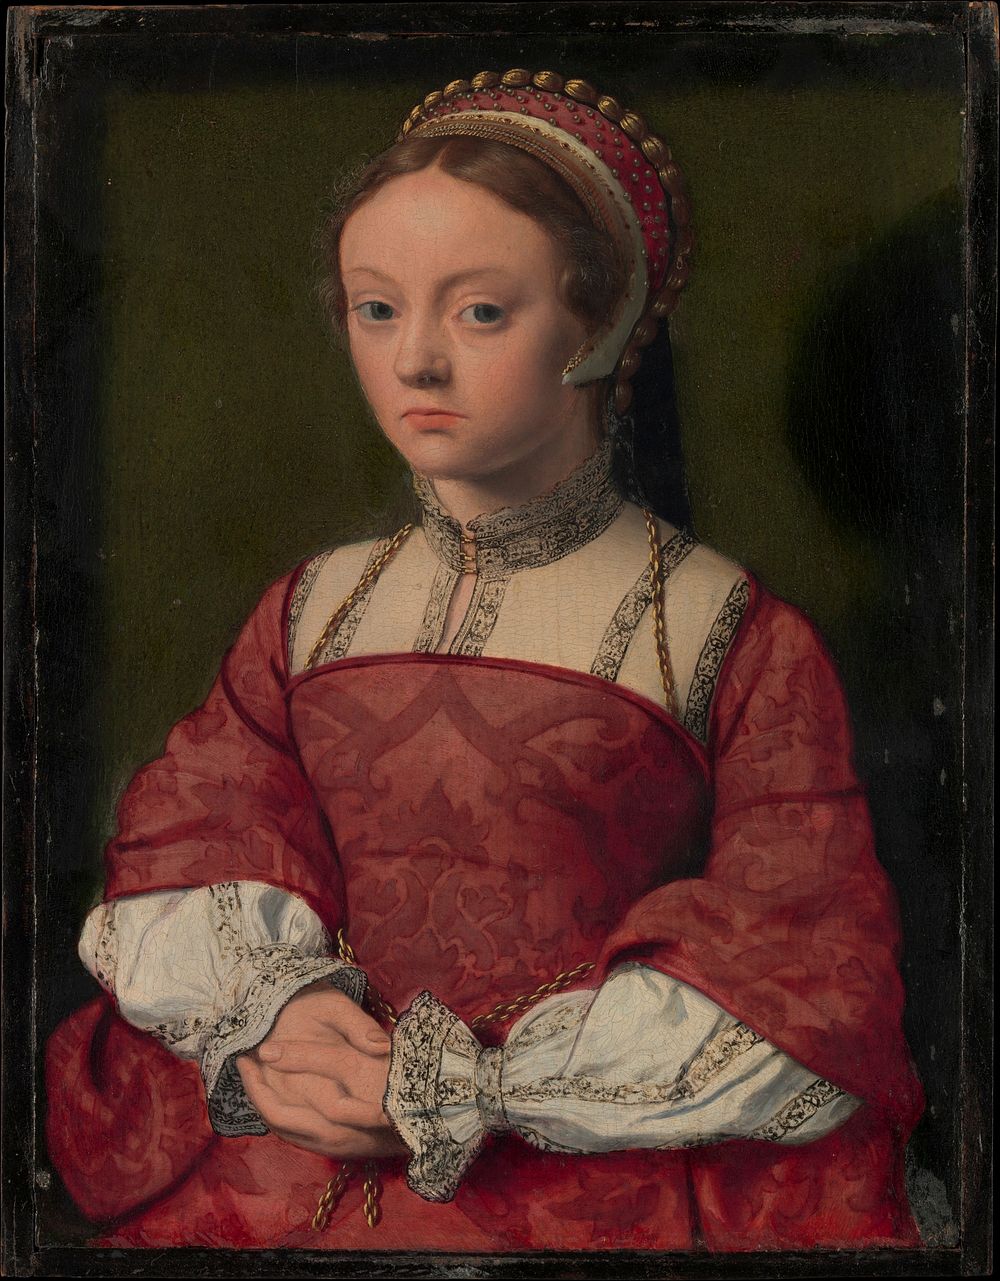 Portrait of a Young Woman by Netherlandish Painter (ca. 1535)